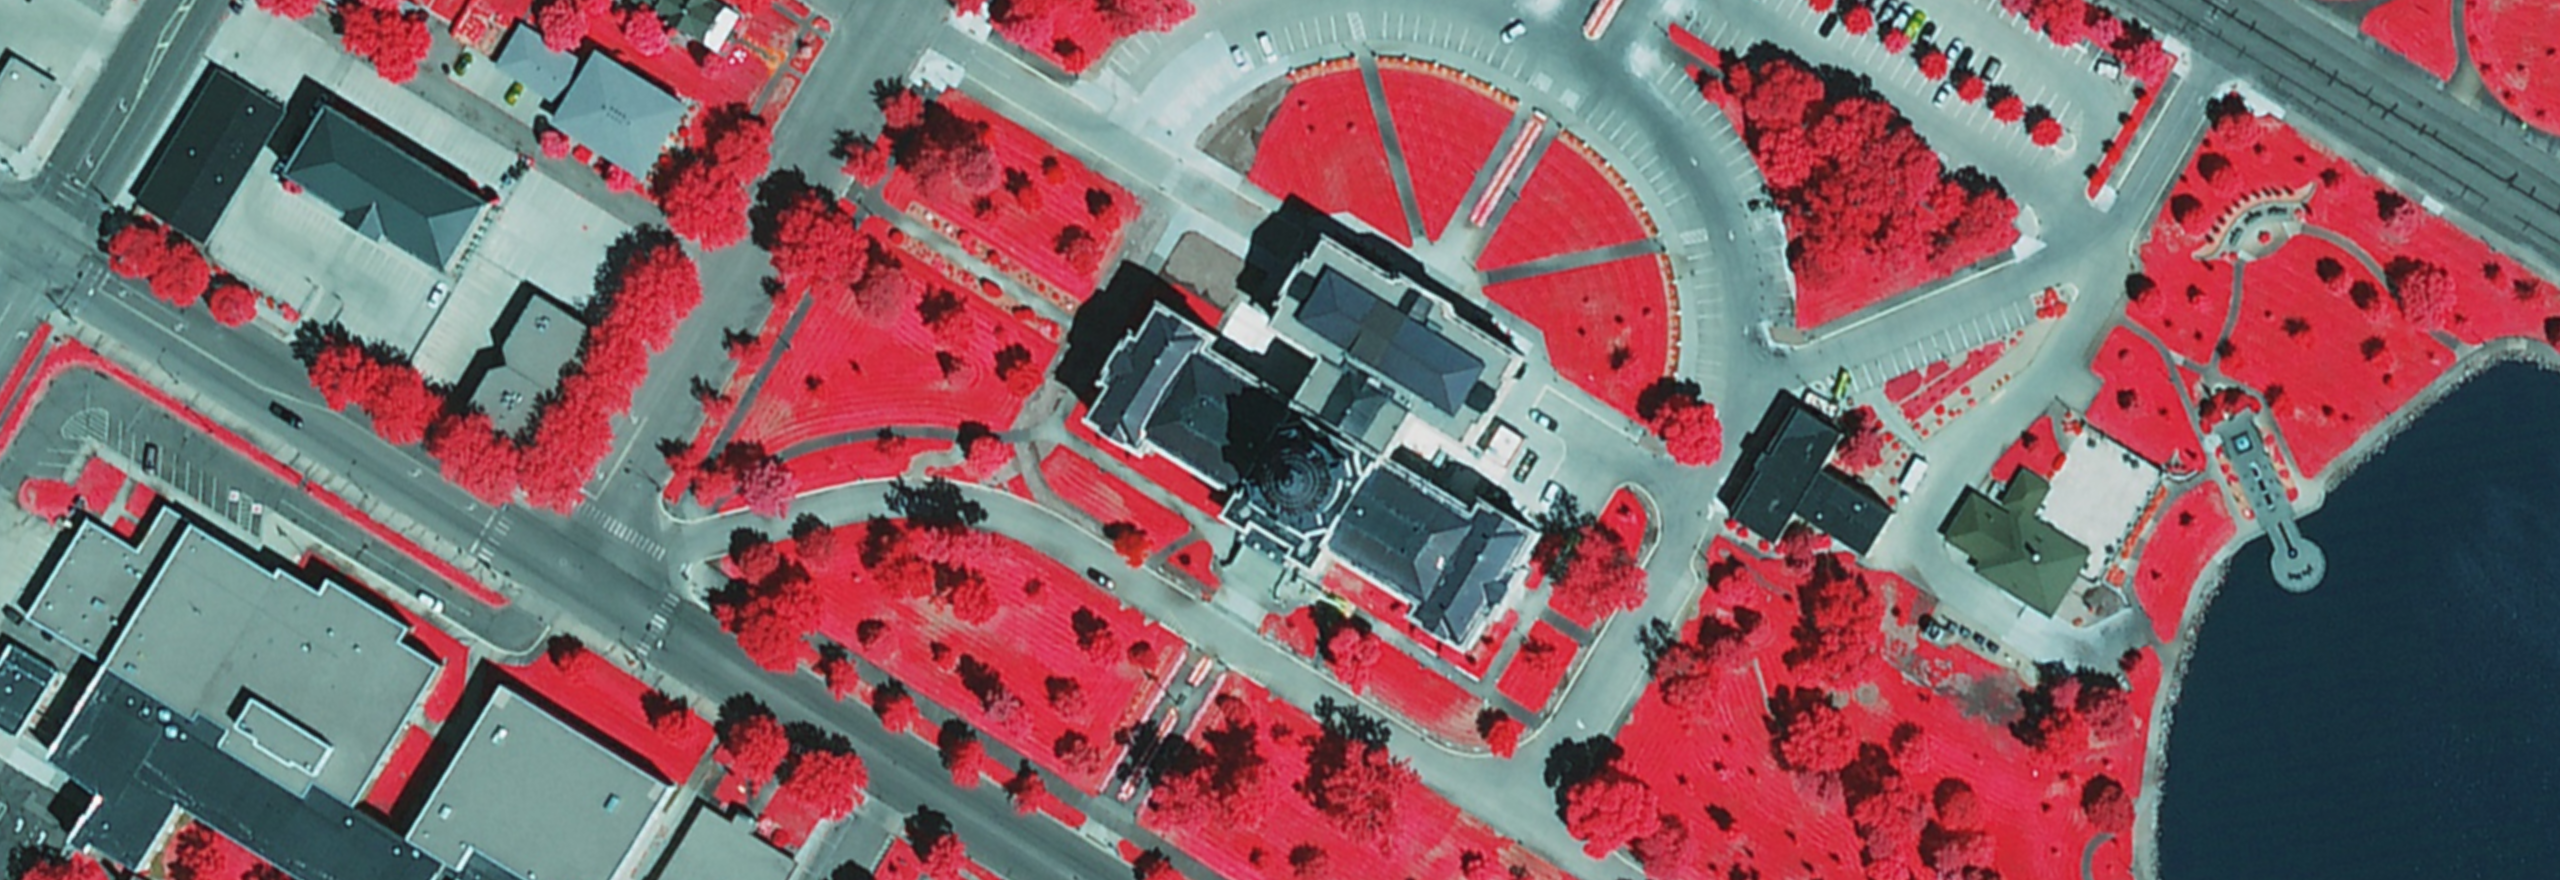 Colour-infrared high-resolution aerial ortho imagery of government building